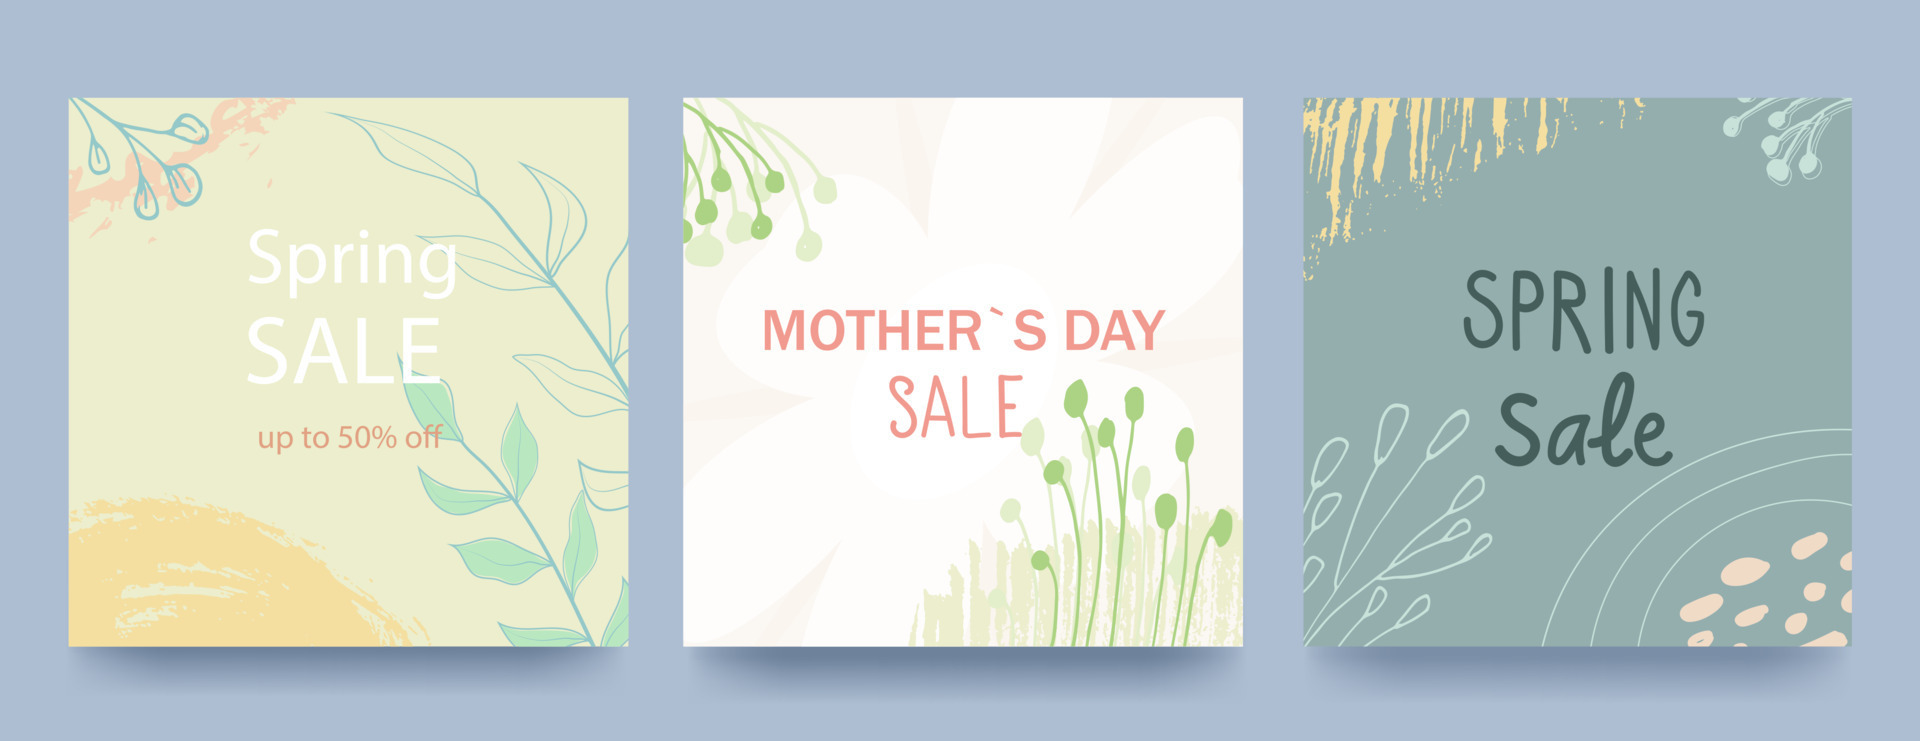 Spring green square backgrounds. Minimalistic style with floral ...